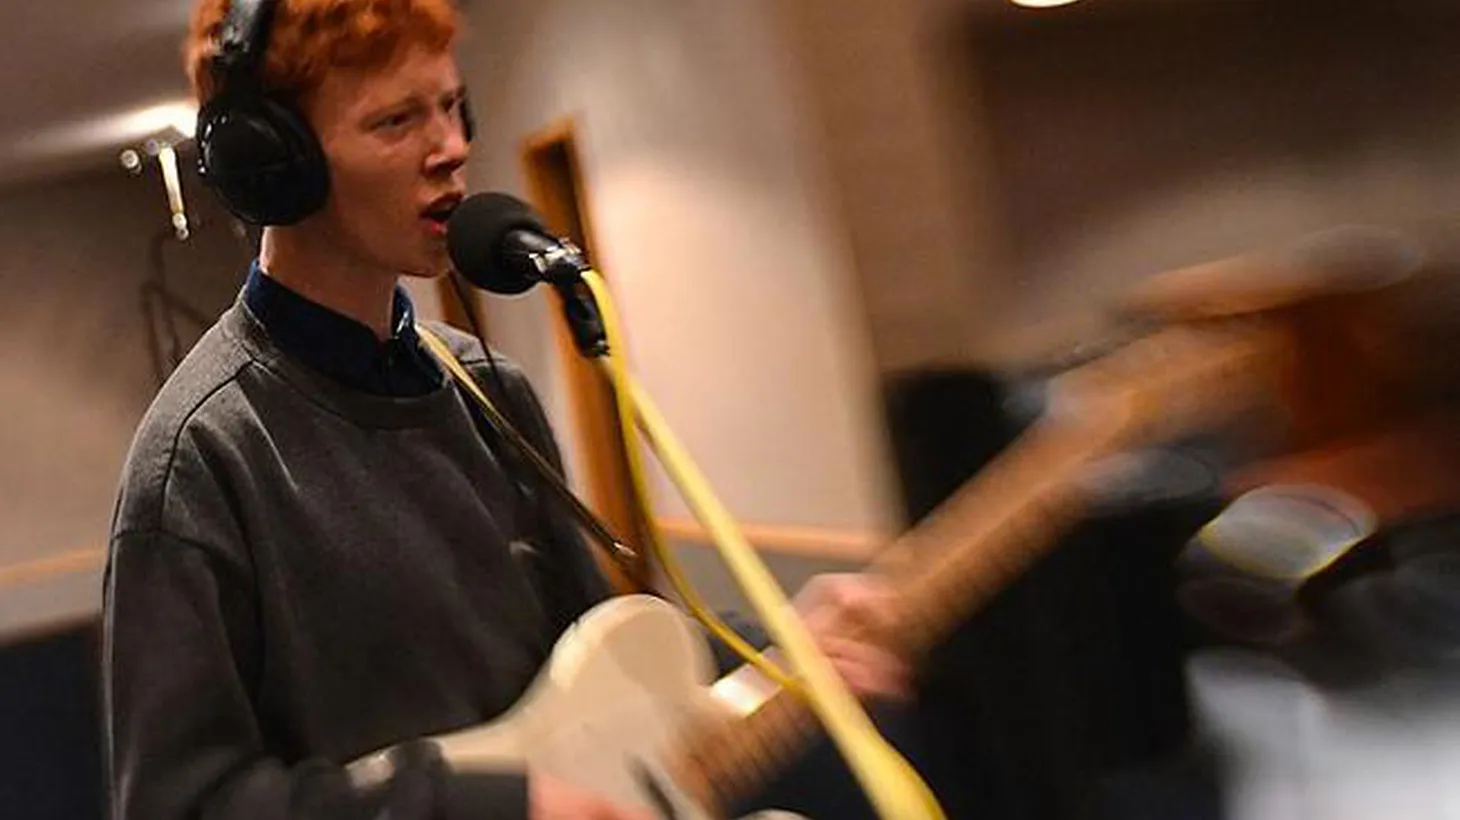 King Krule is the alias of 19-year-old wunderkind Archy Marshall. KCRW DJs are incredibly excited about this UK artist and his new CD was an immediate station favorite.